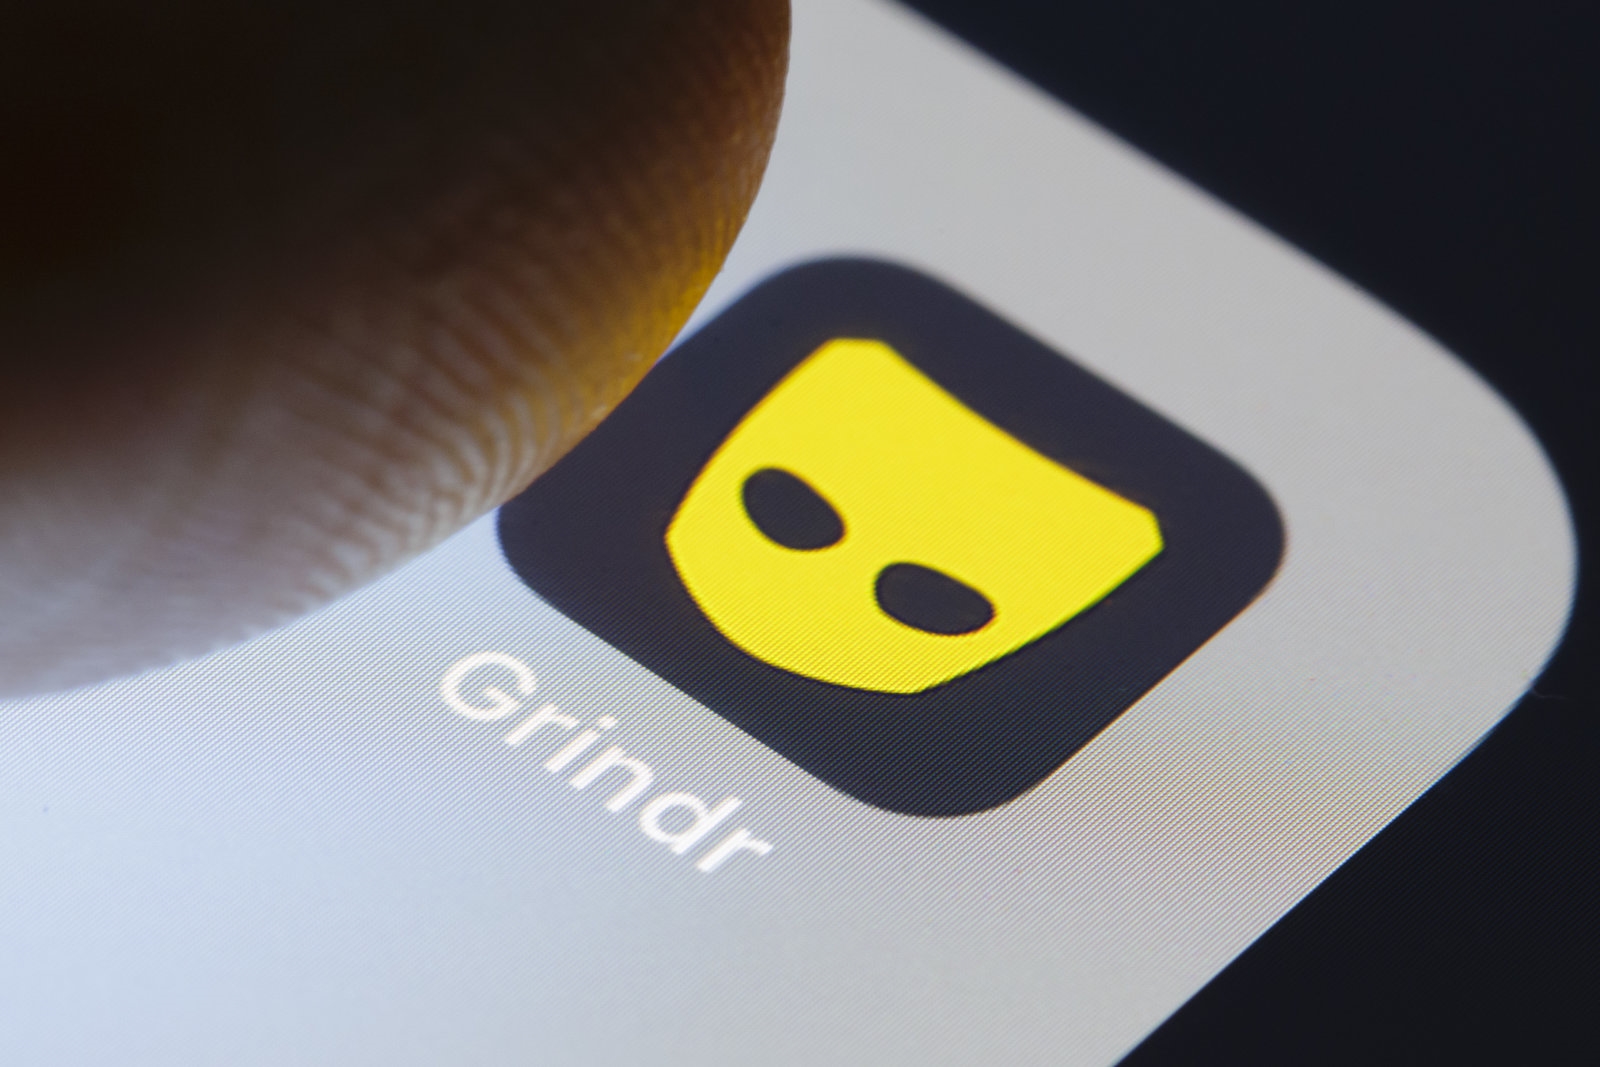 Grindr may be sold by its Chinese owner due to US national security risk | DeviceDaily.com